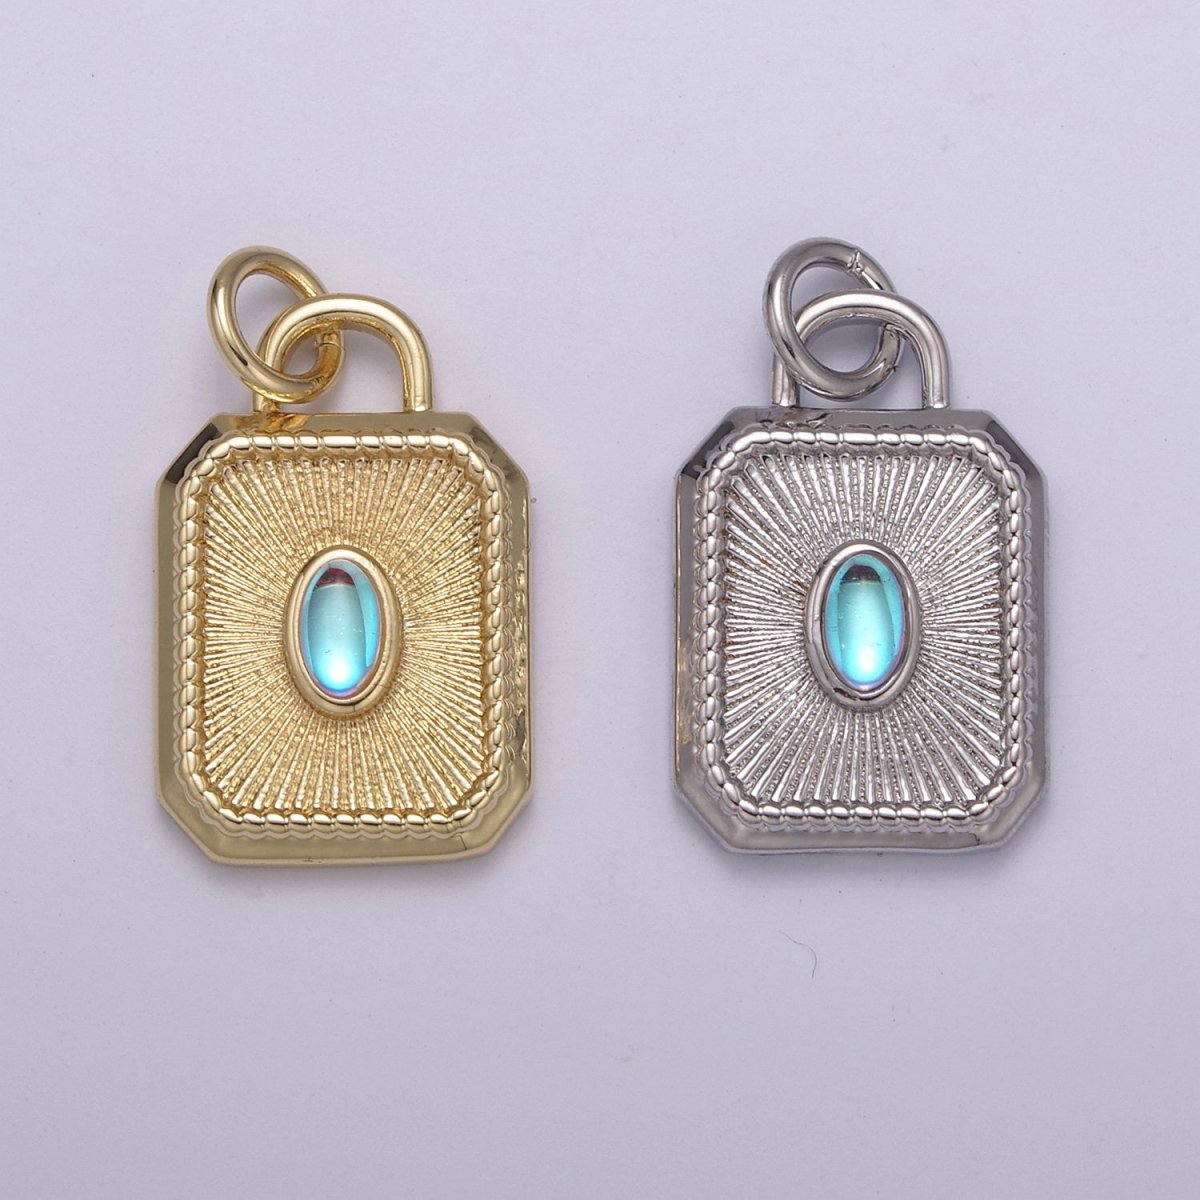 14k Gold filled Charm Geometric Tag Tile rectangle charm w/ Moonstone Medallion pendant, Necklace supply, Jewelry makings N-209 N-210 - DLUXCA